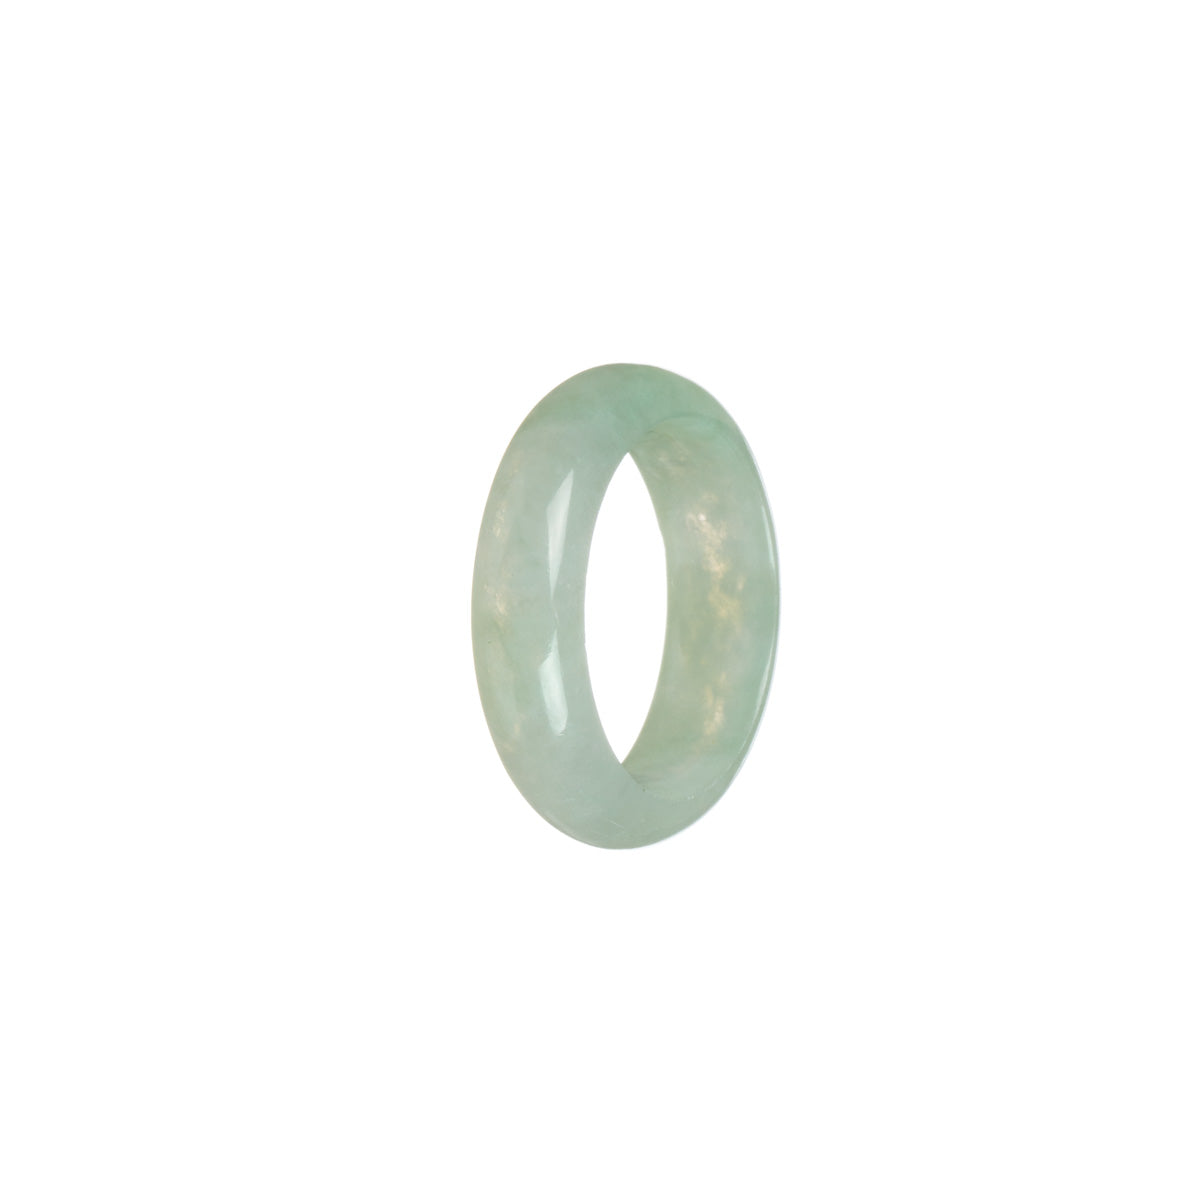 Authentic Icy Pale Green Jadeite Jade Ring - Size S